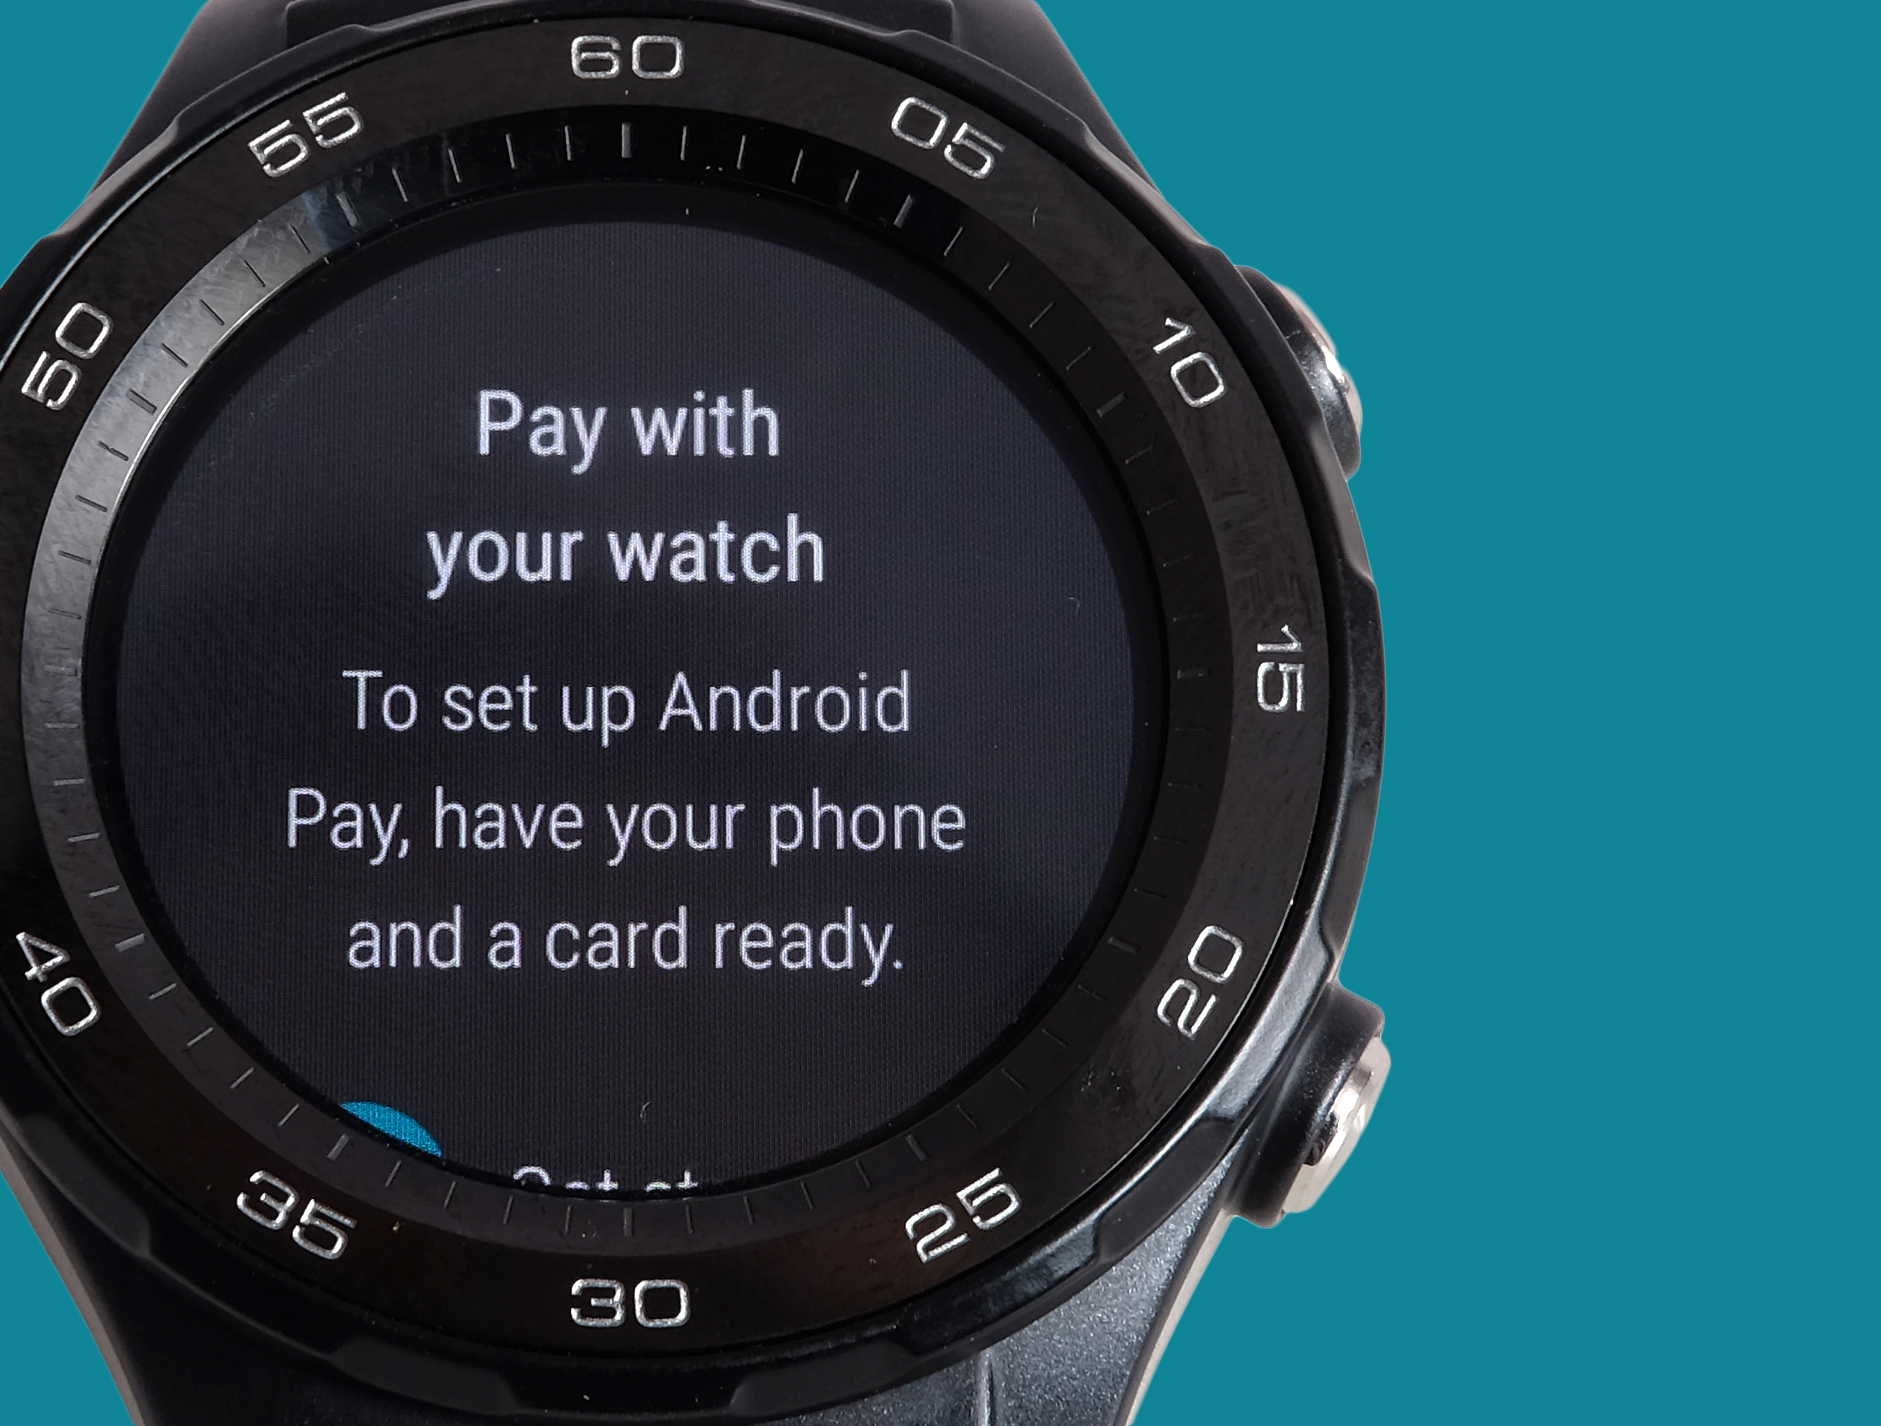 Android Wear 2.0 extras: pay by swipe